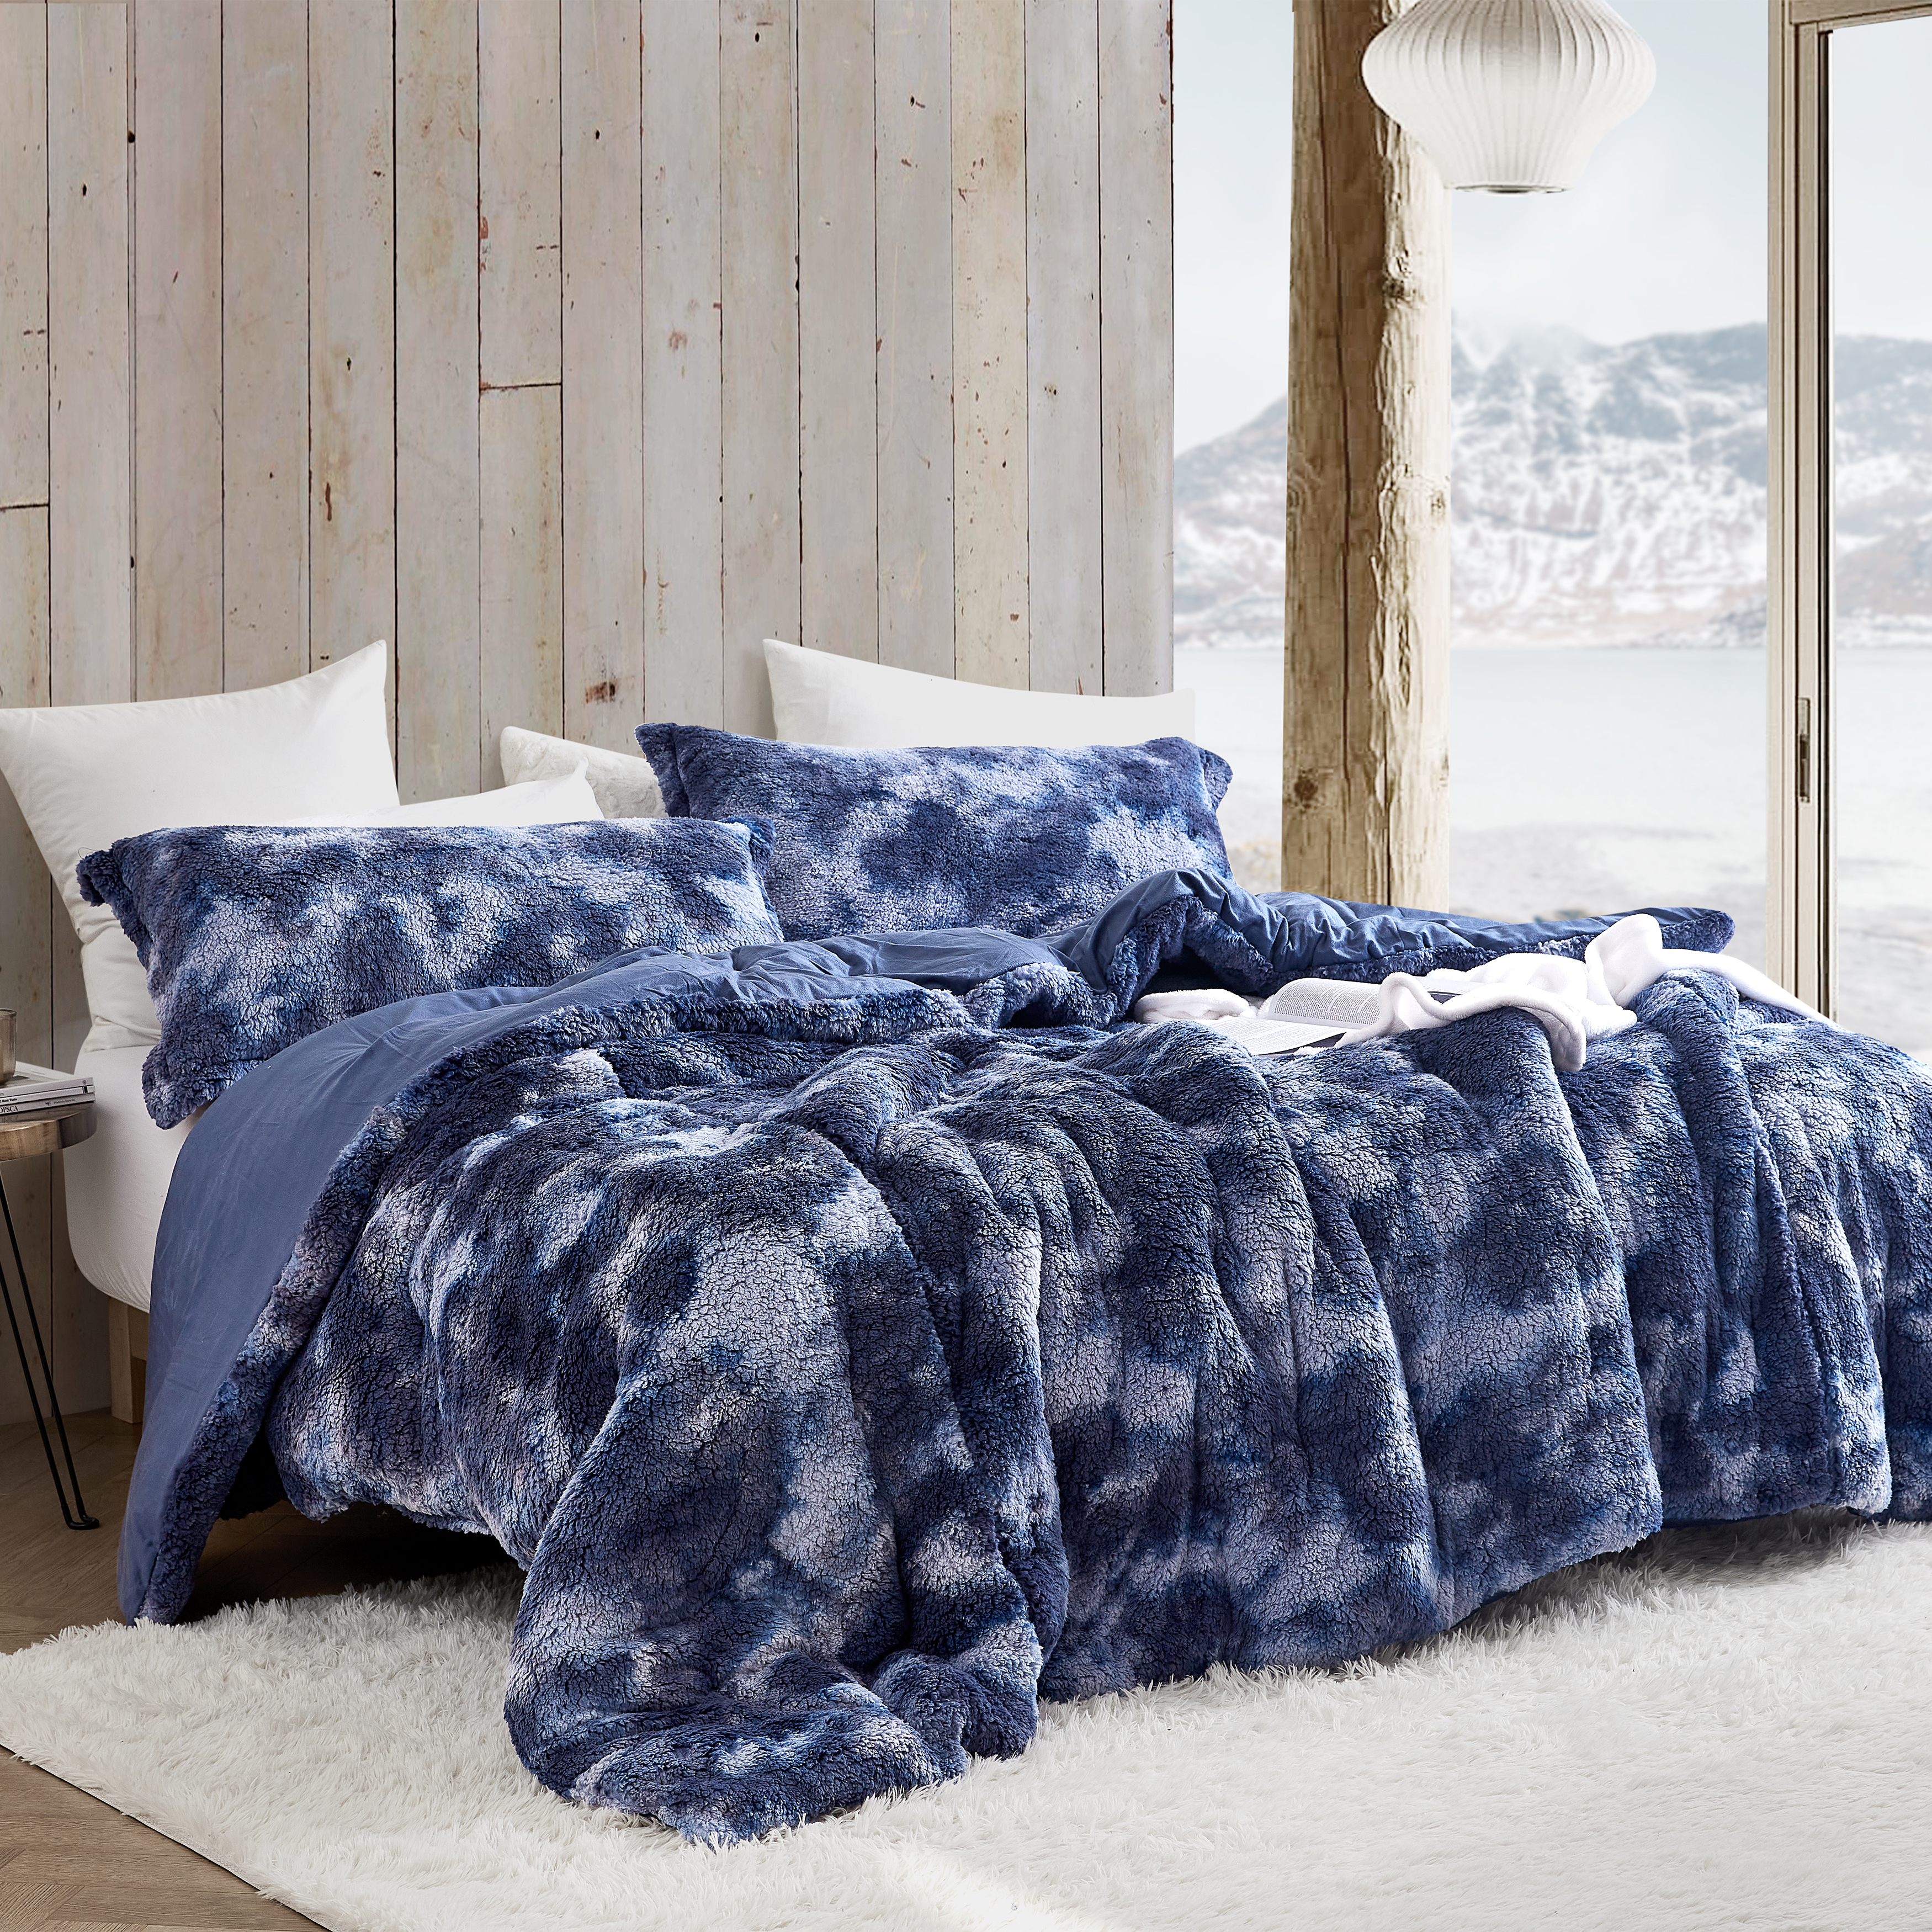 Marble Blue Bedroom Decor Ideas Trendy King XL Bedding Set for King Sized Bed